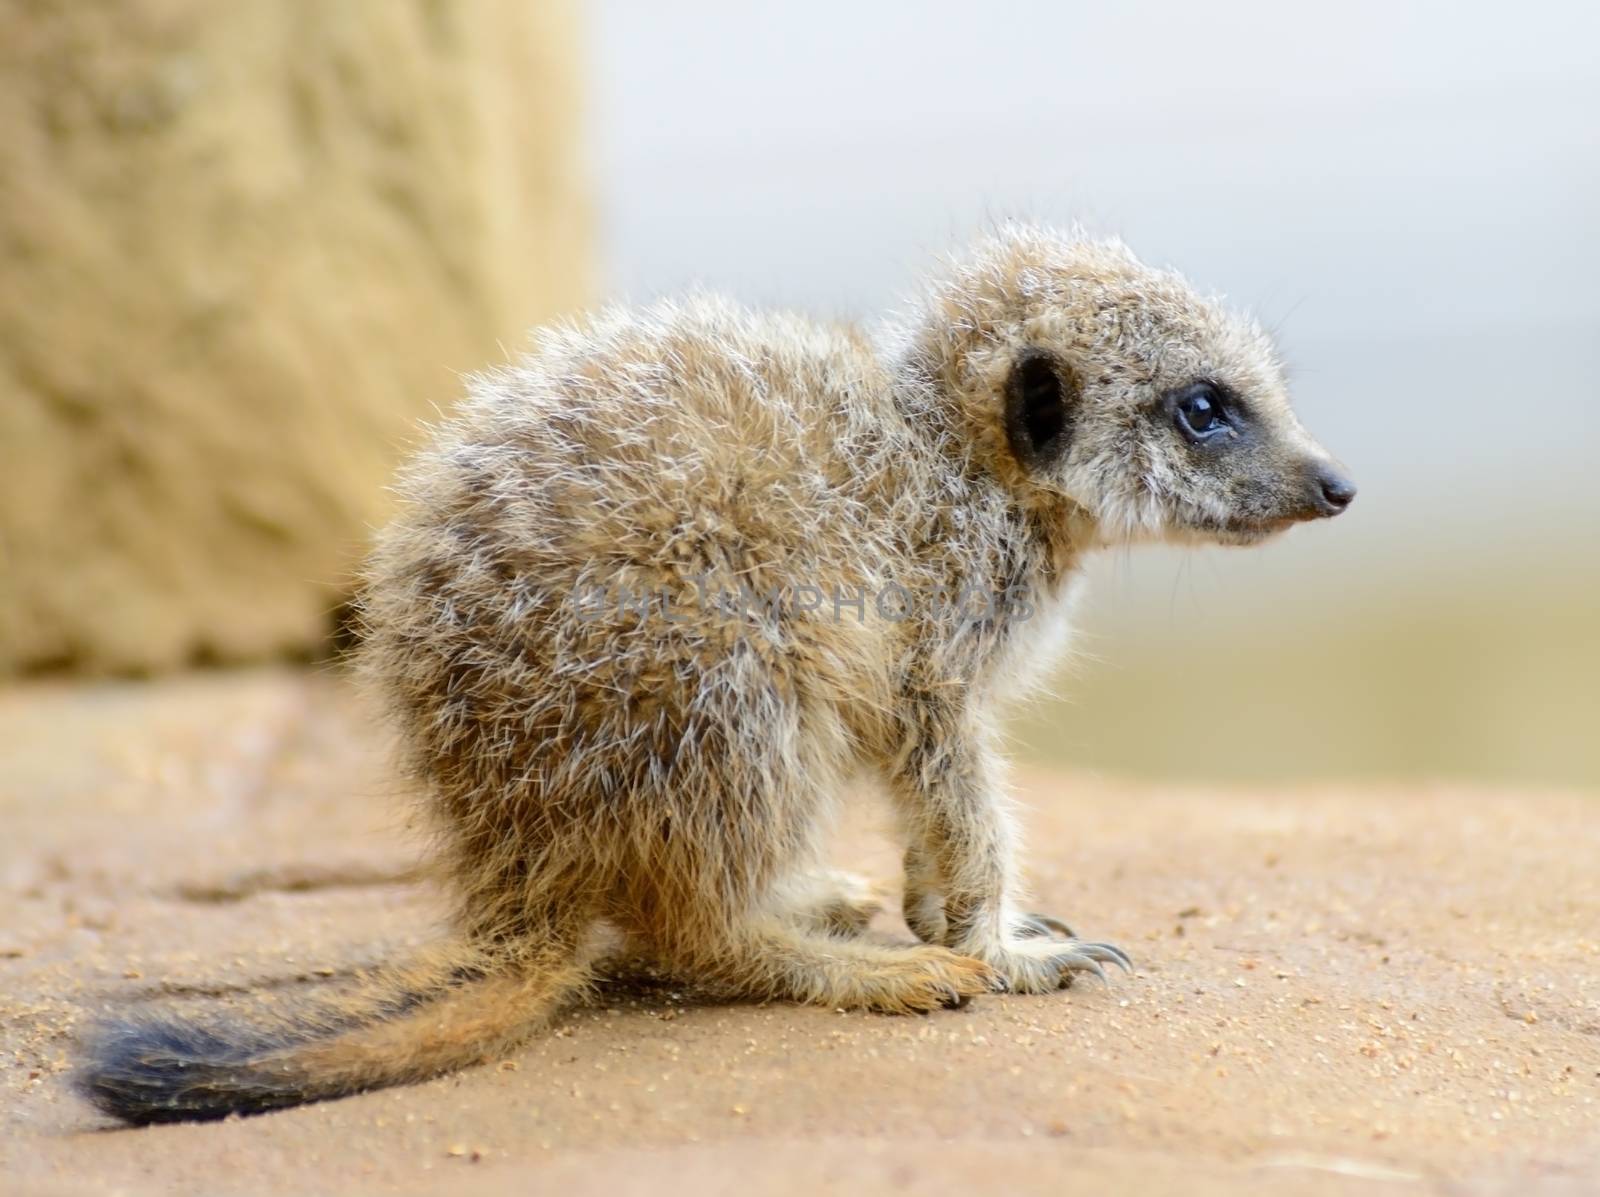 Meerkat baby by kmwphotography